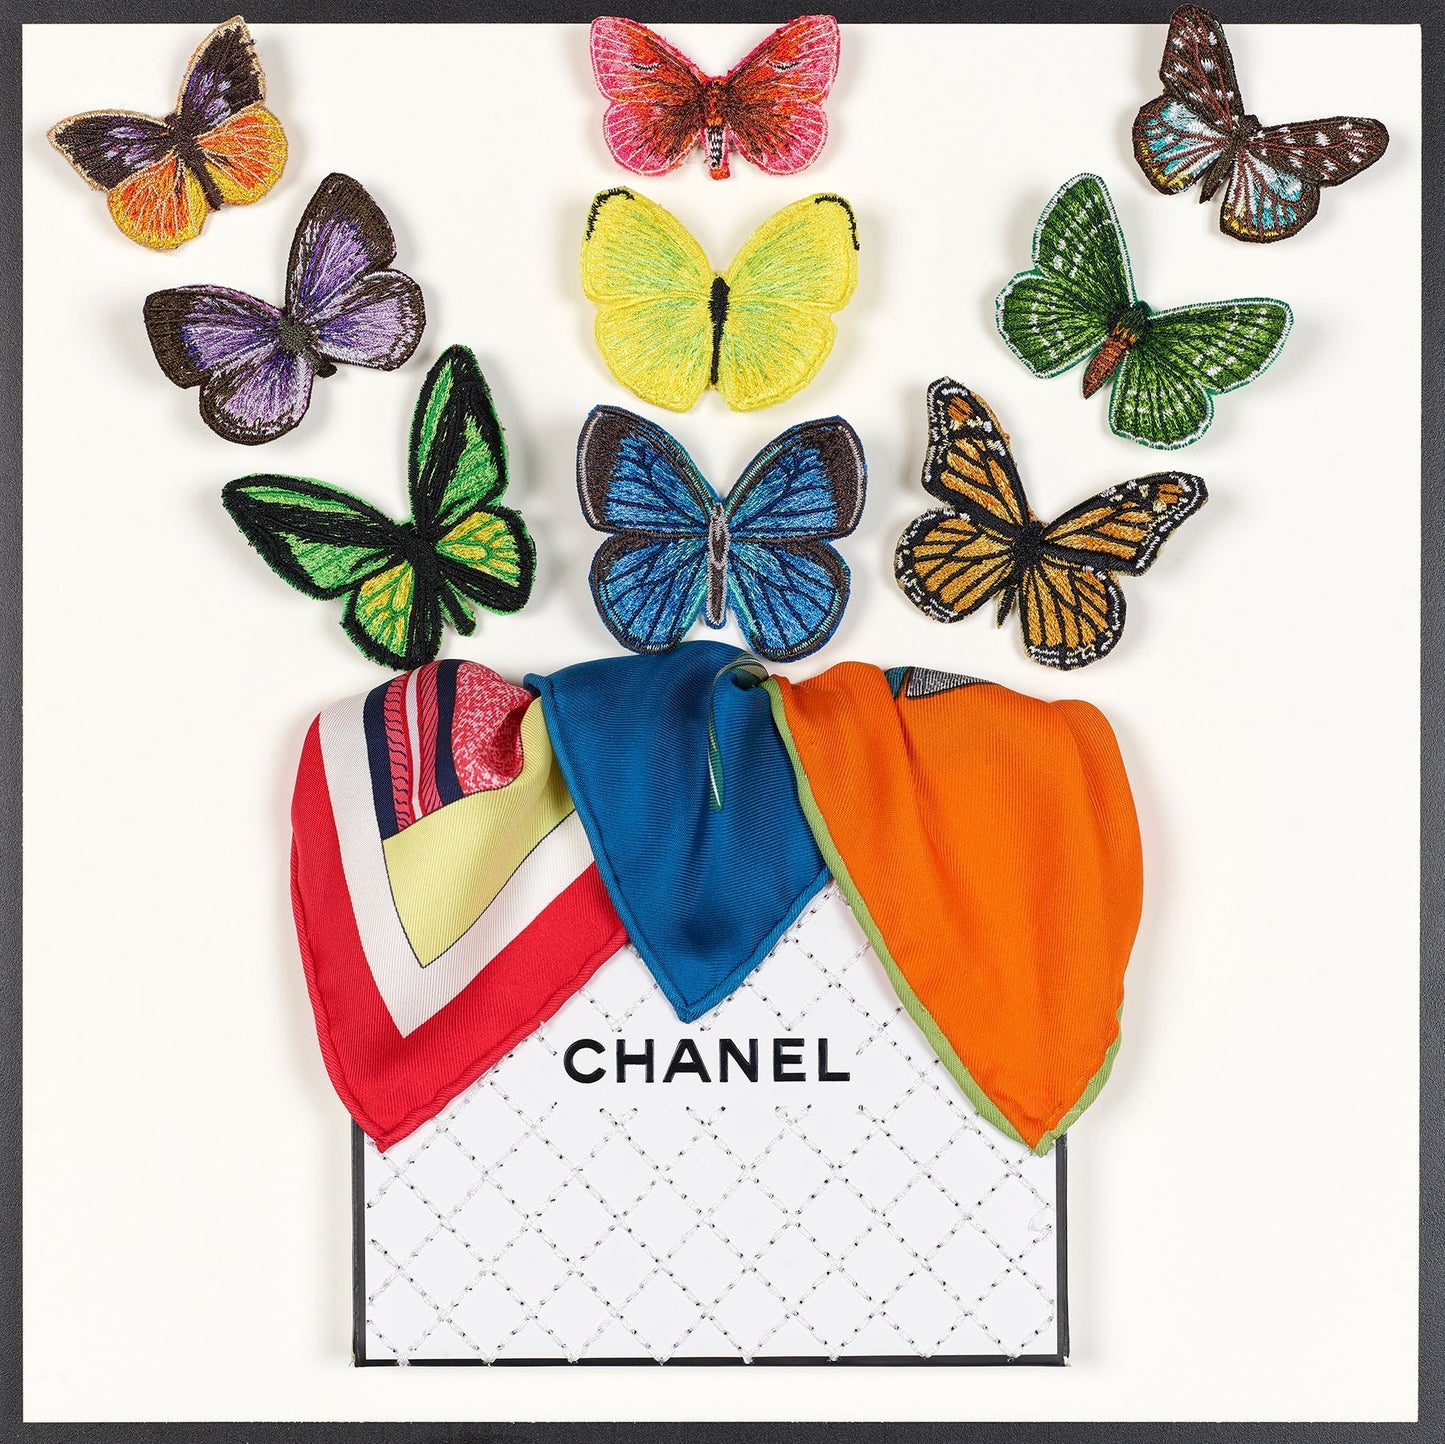 Chanel Butterfly Surprise